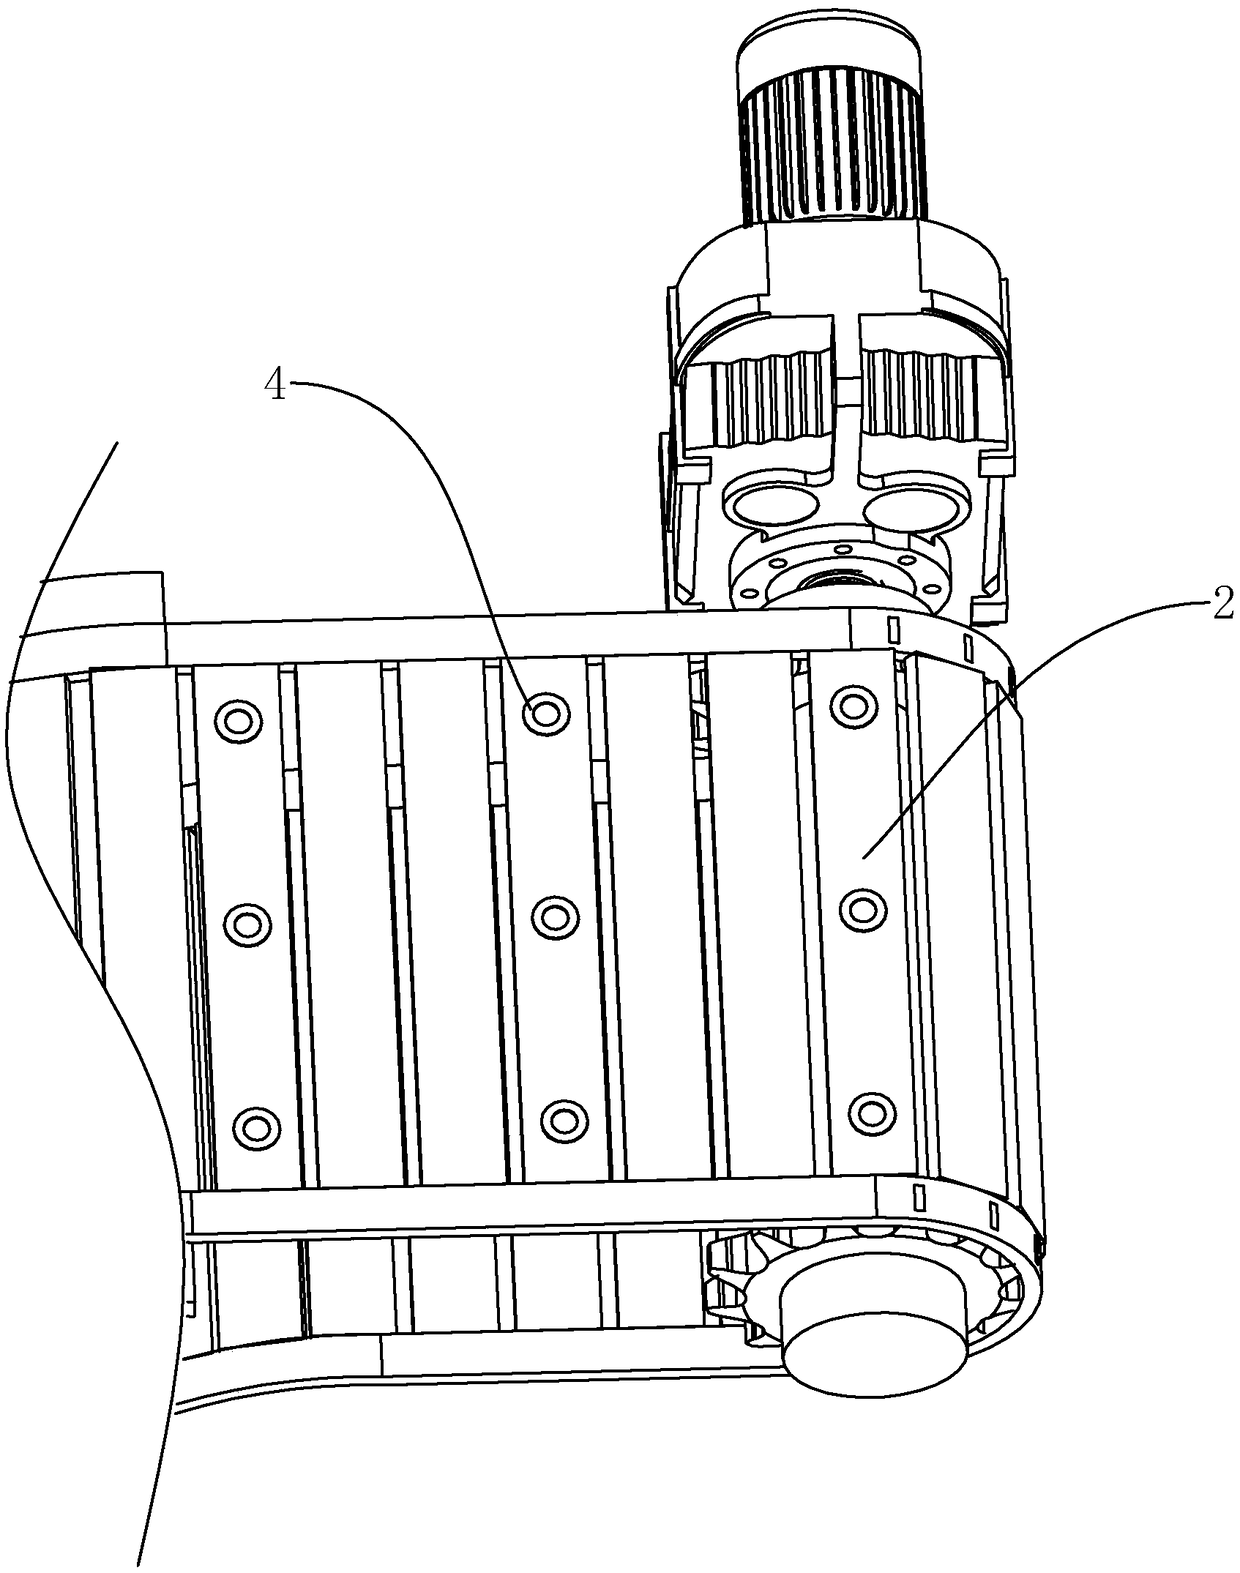 Feeding device used for cold header